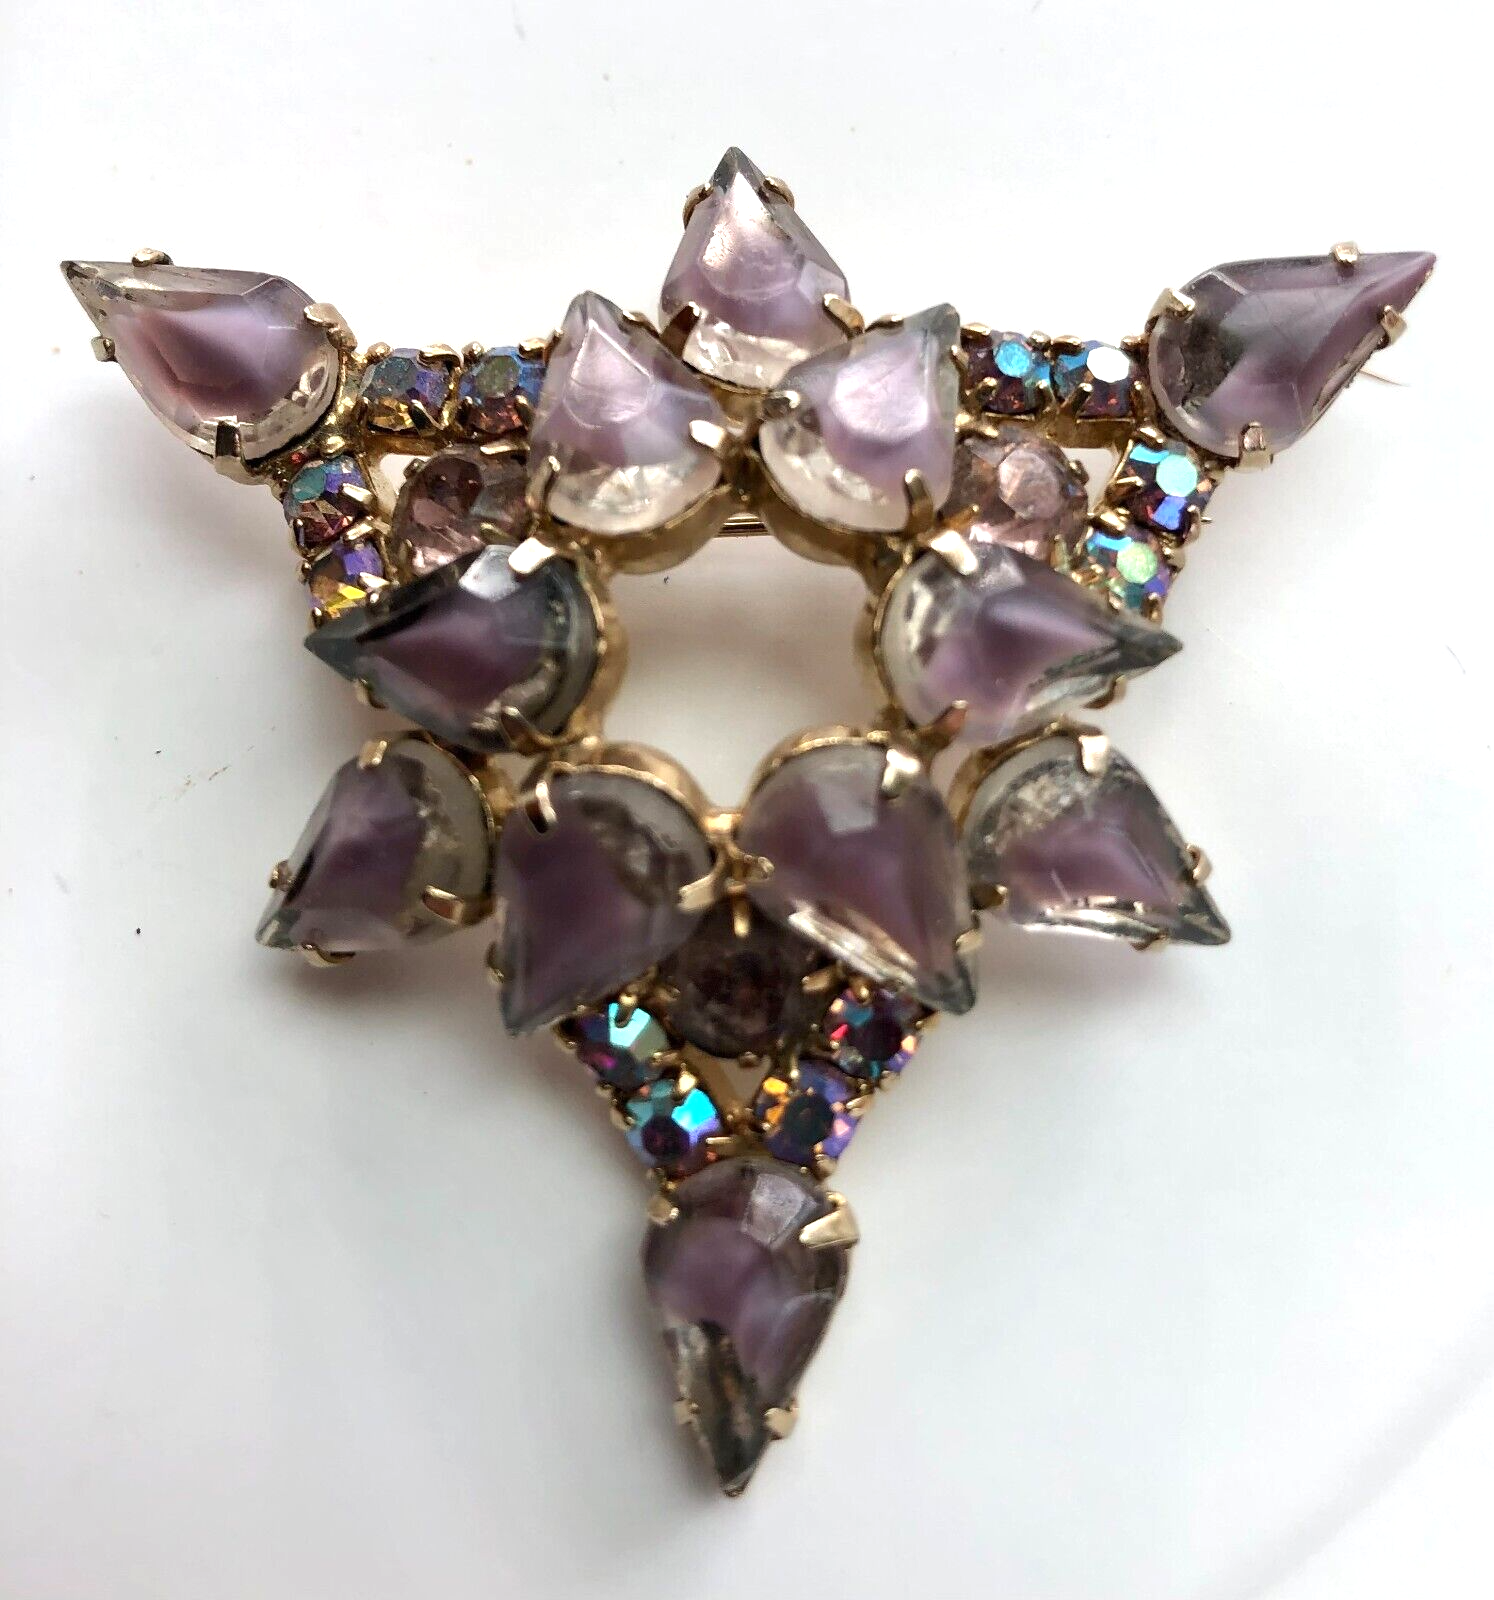 Primary image for Vintage Amethyst AB Rhinestone Doomed Triangle Pin Brooch 2.5" x 2.5" MCM